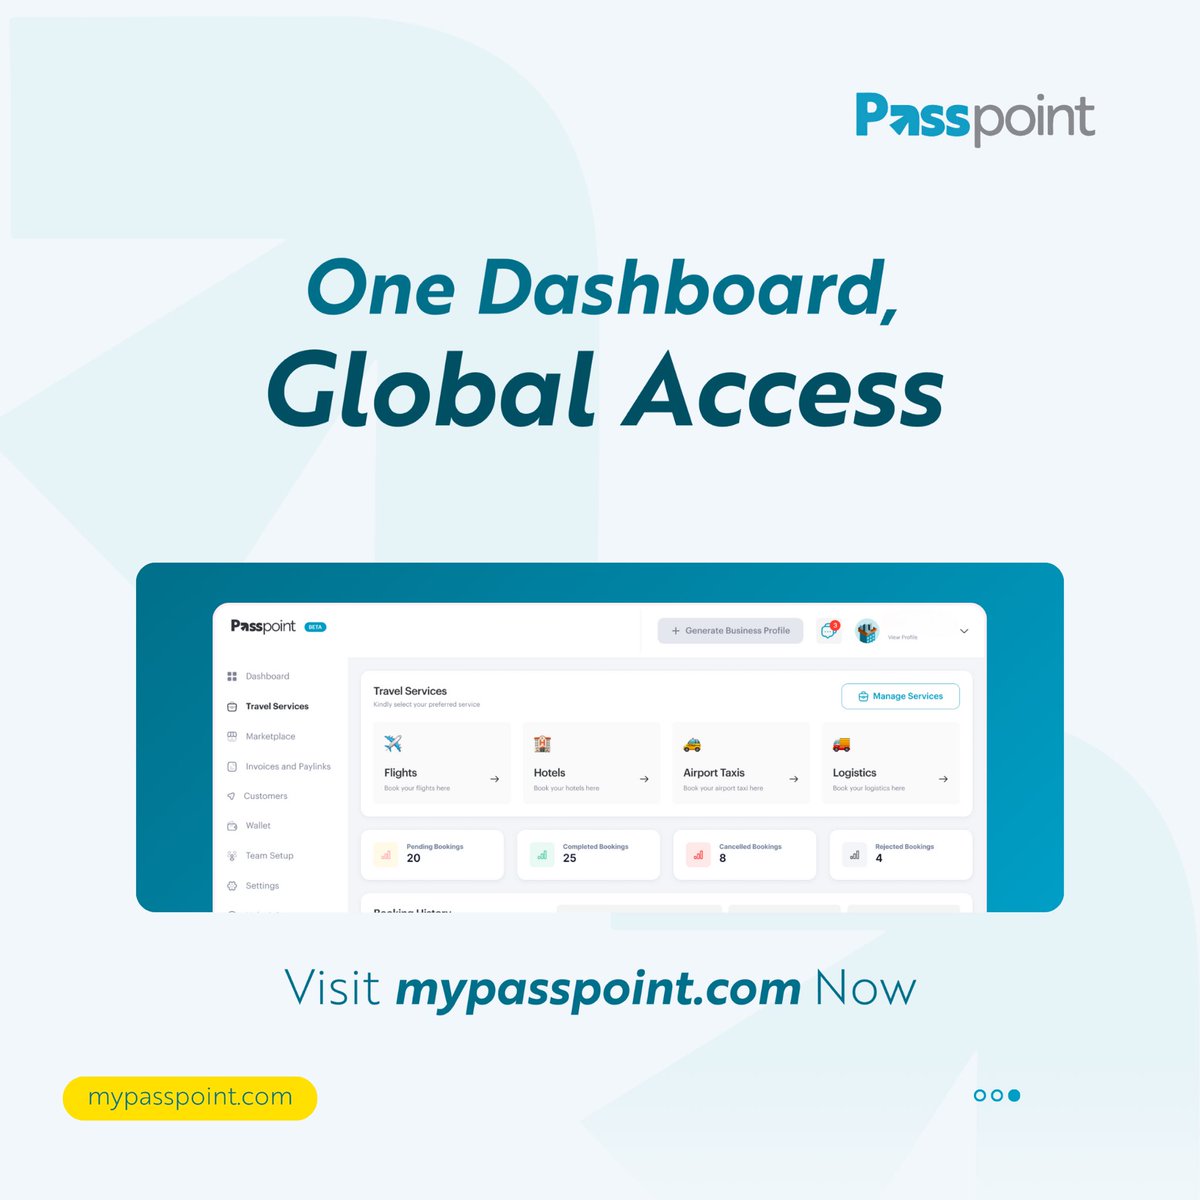 There is something about Passpoint Virtual Cards, get yours today to find out.😉 #passpoint